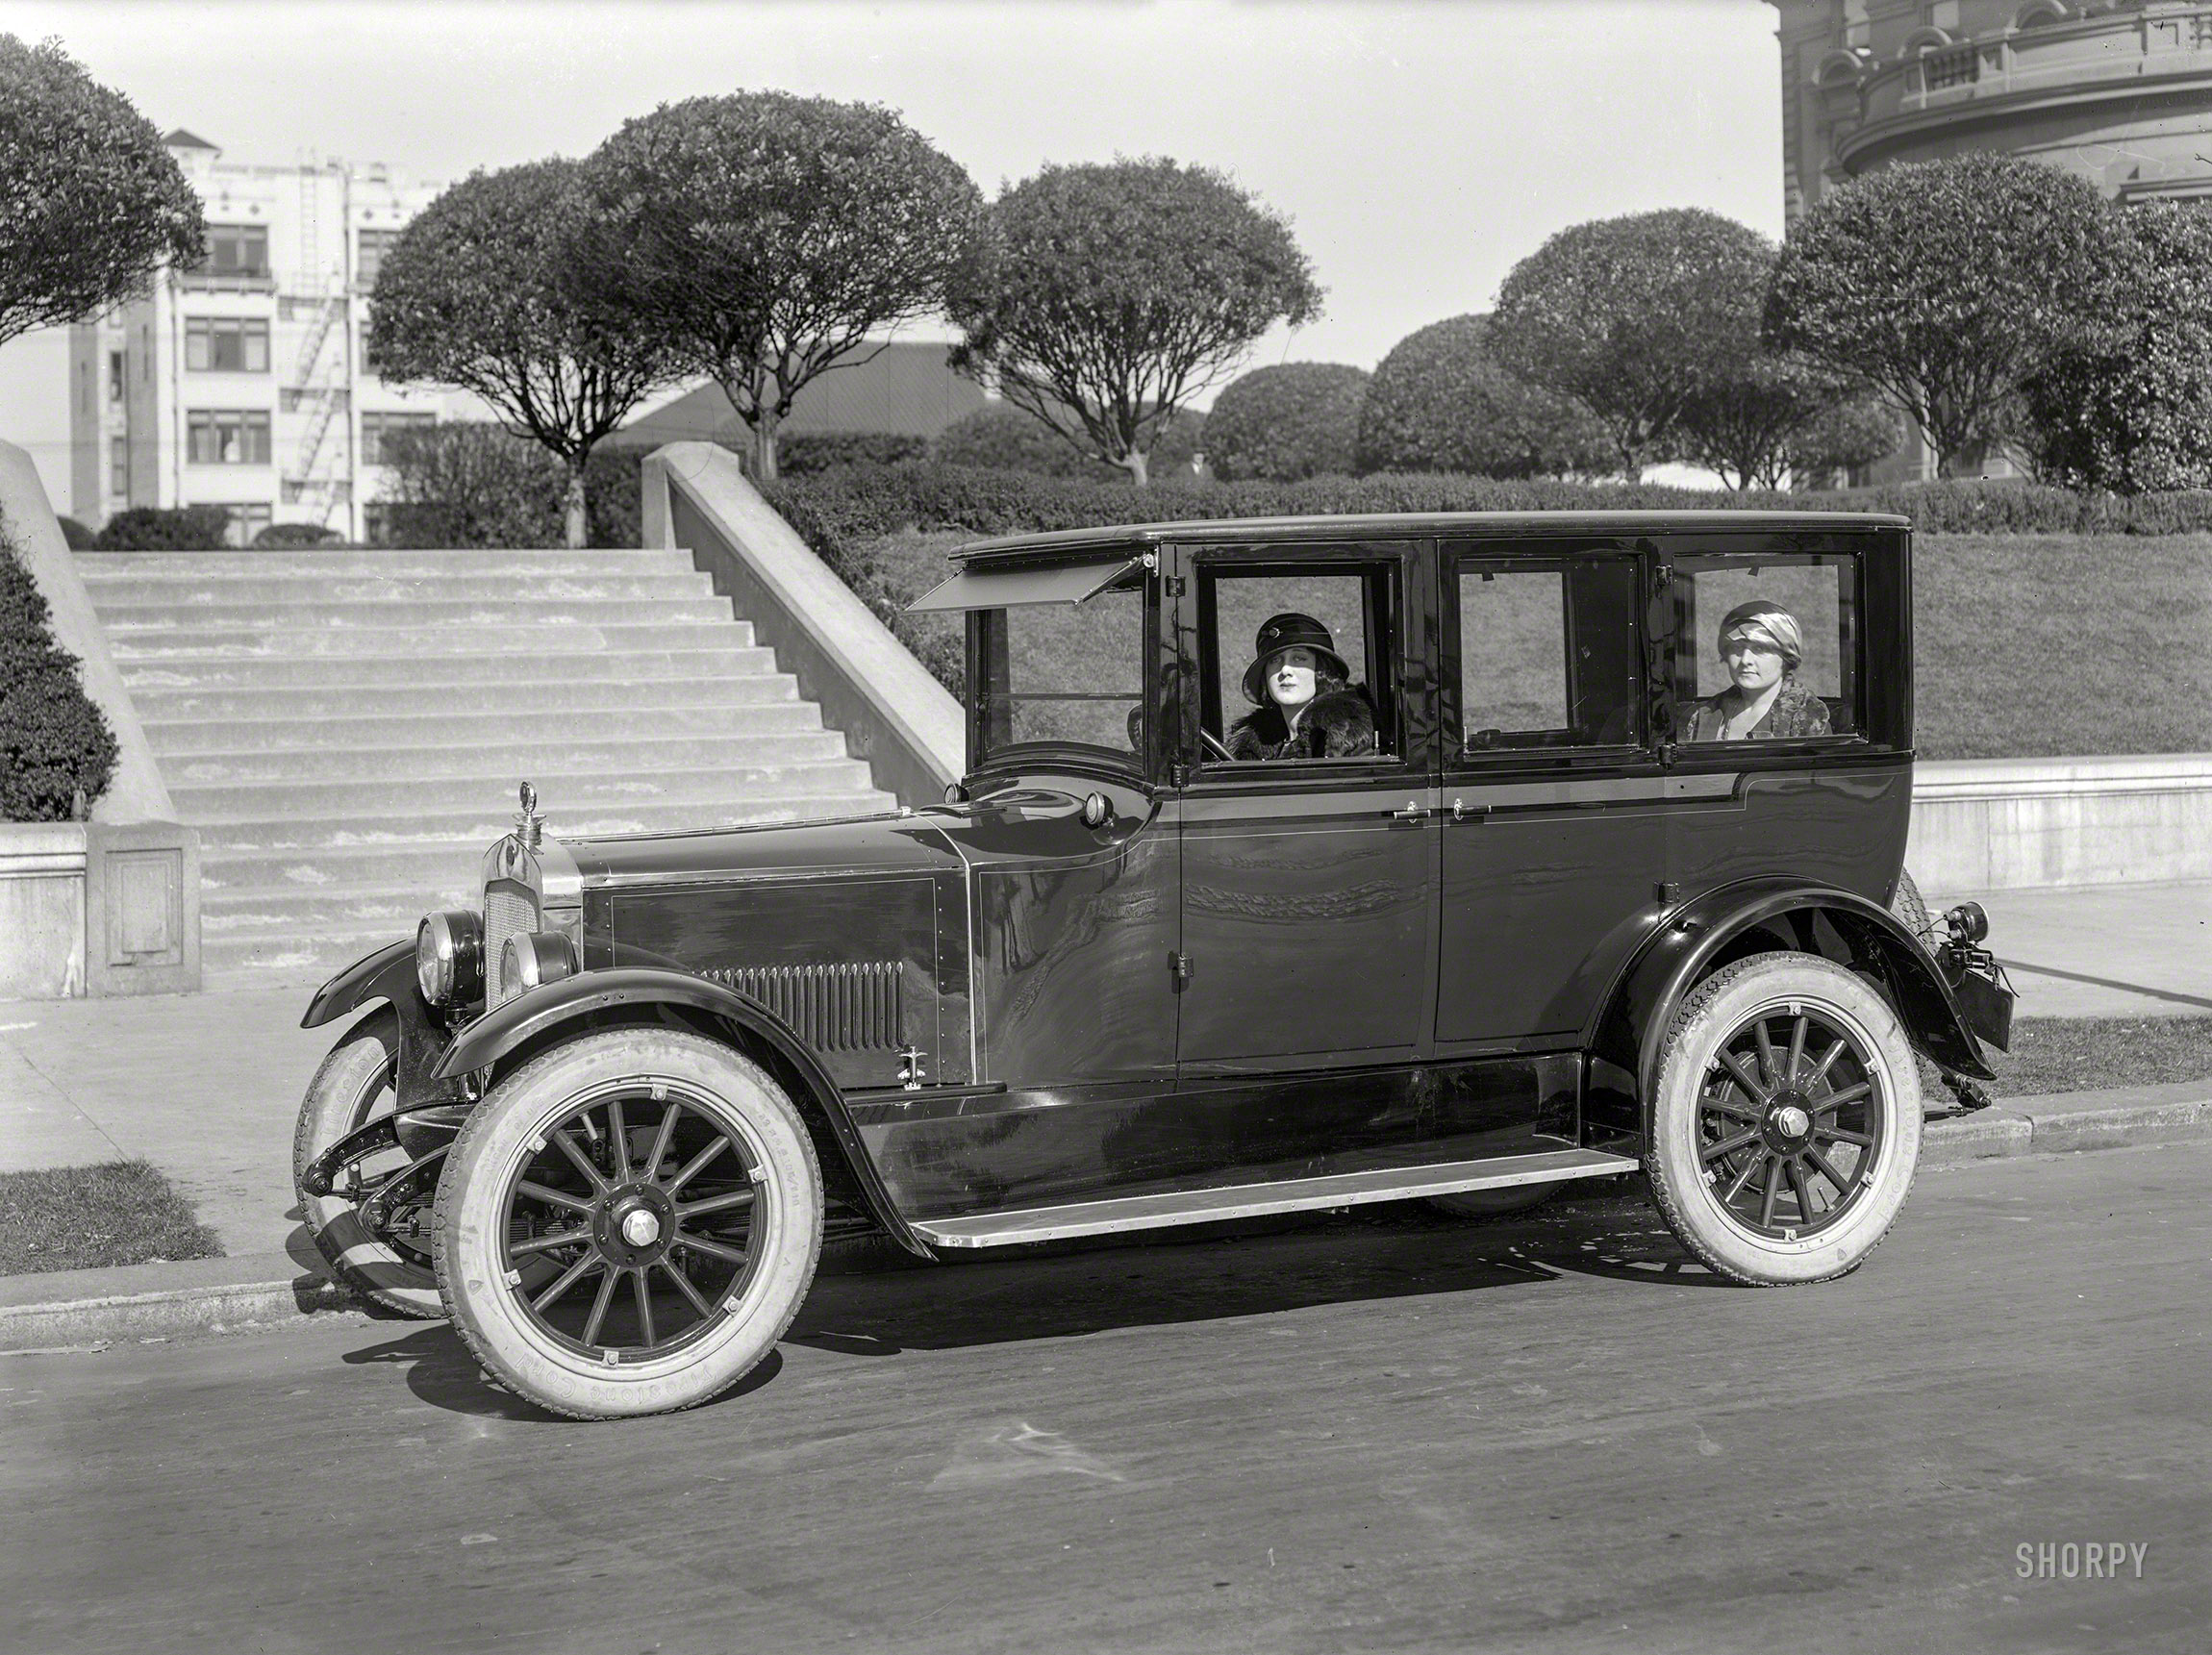 San Francisco circa 1923. "Barley sedan on California Street at Huntington Park." Today's reading from the Shorpy Bible of Baroque Barouches. 5x7 inch glass negative by that automotive amanuensis Christopher Helin. View full size.